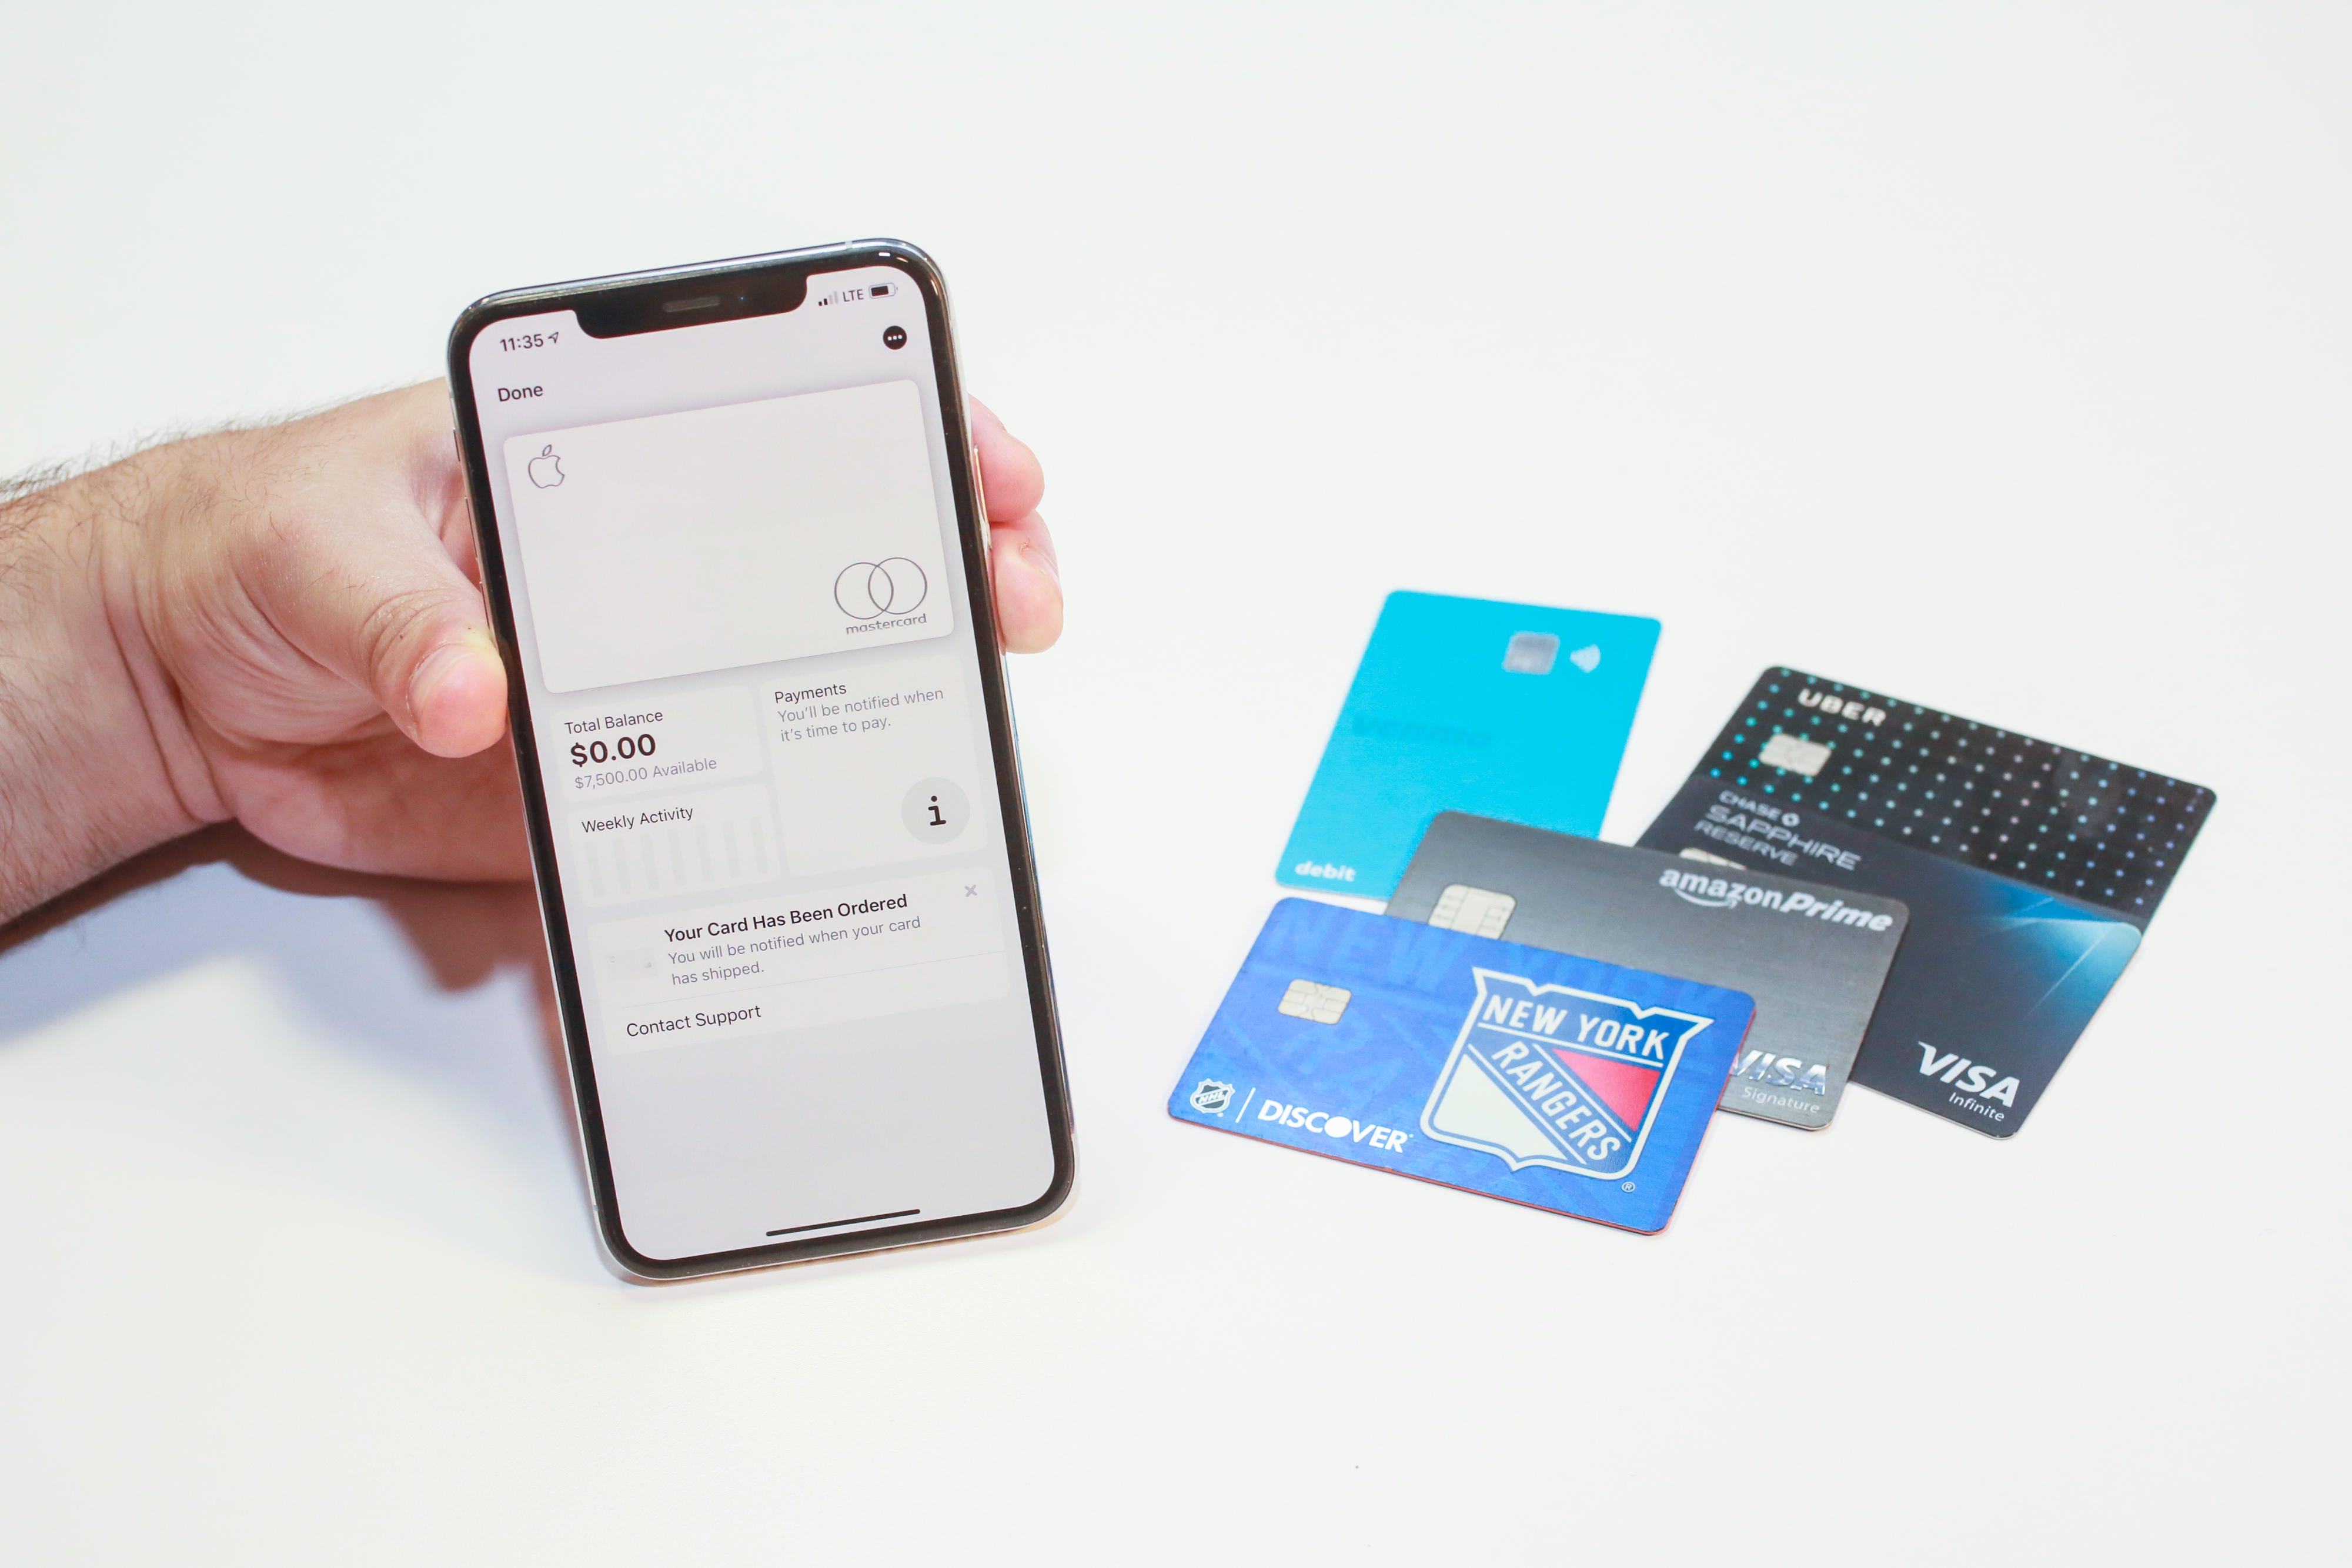 apple credit card on iPhone and four physical credit cards